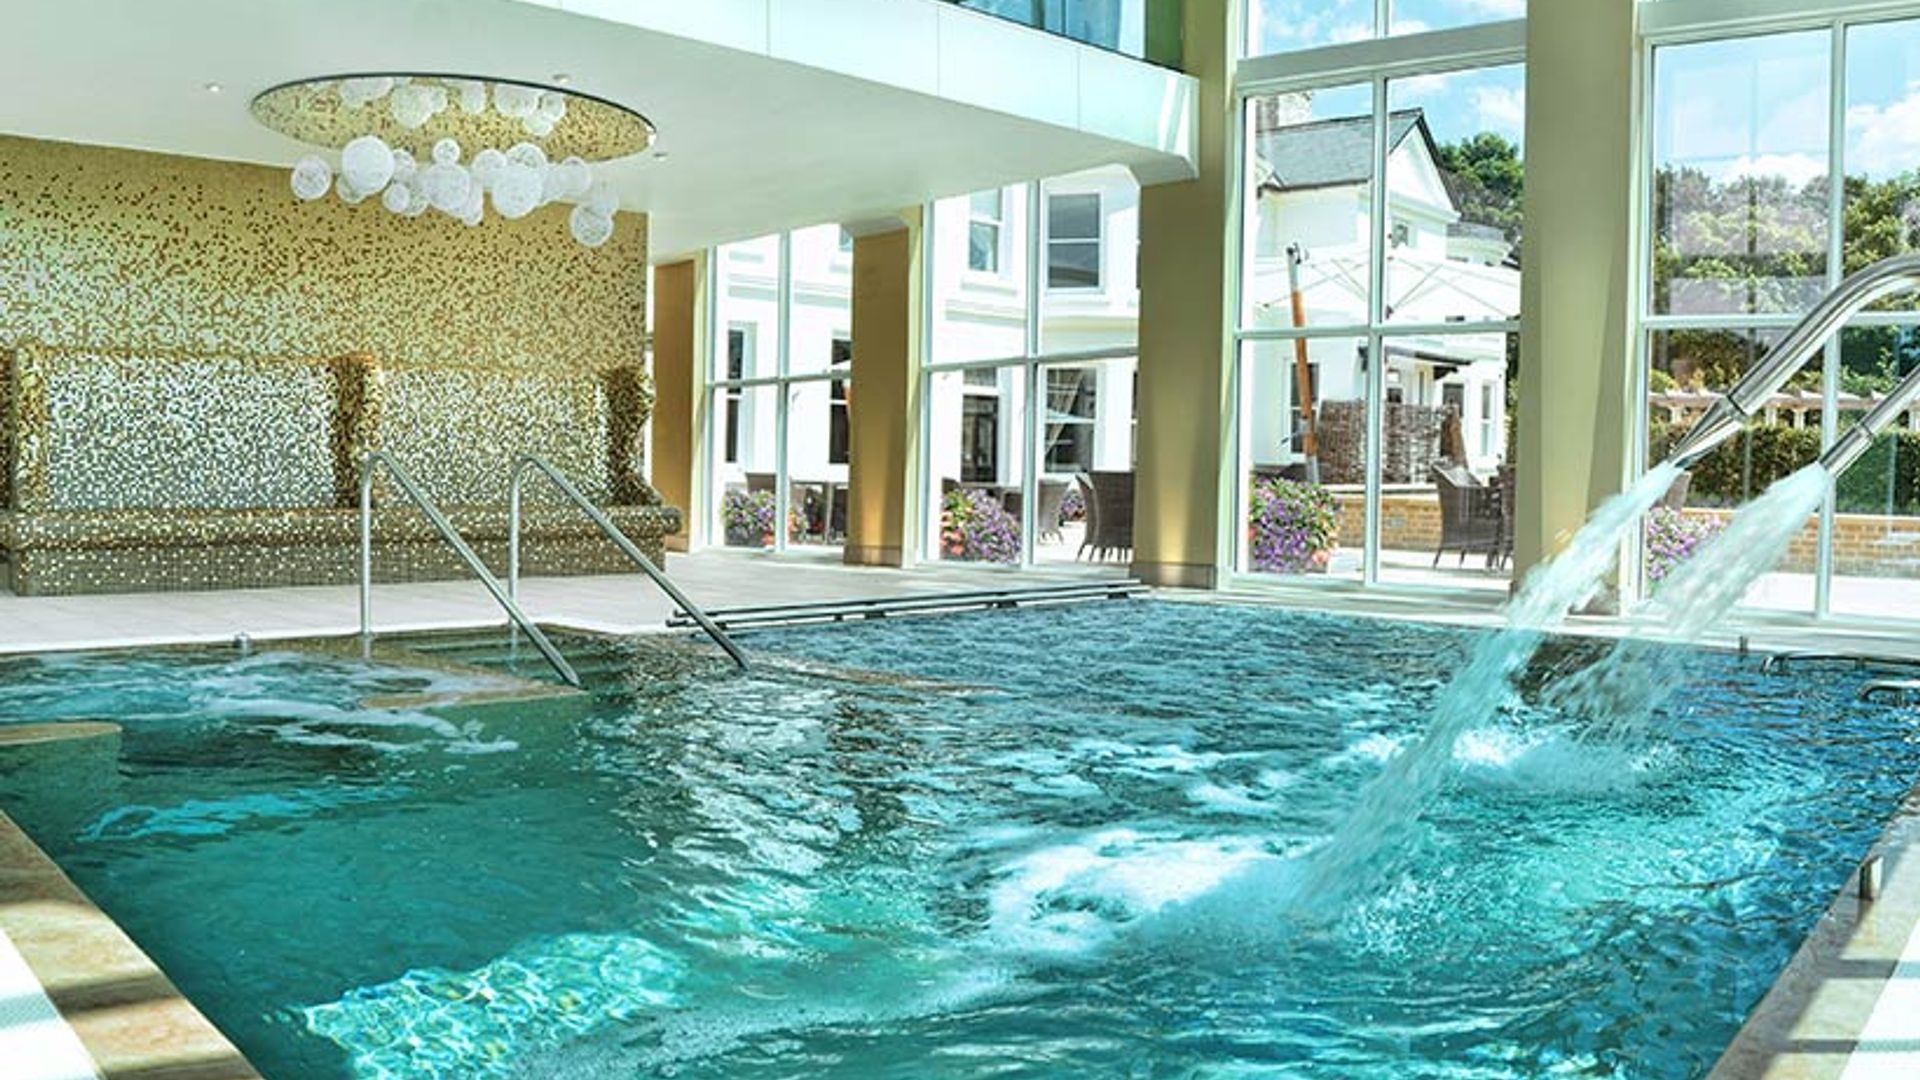 Want a winter retreat? Look no further than the Spa at Bedford Lodge hotel